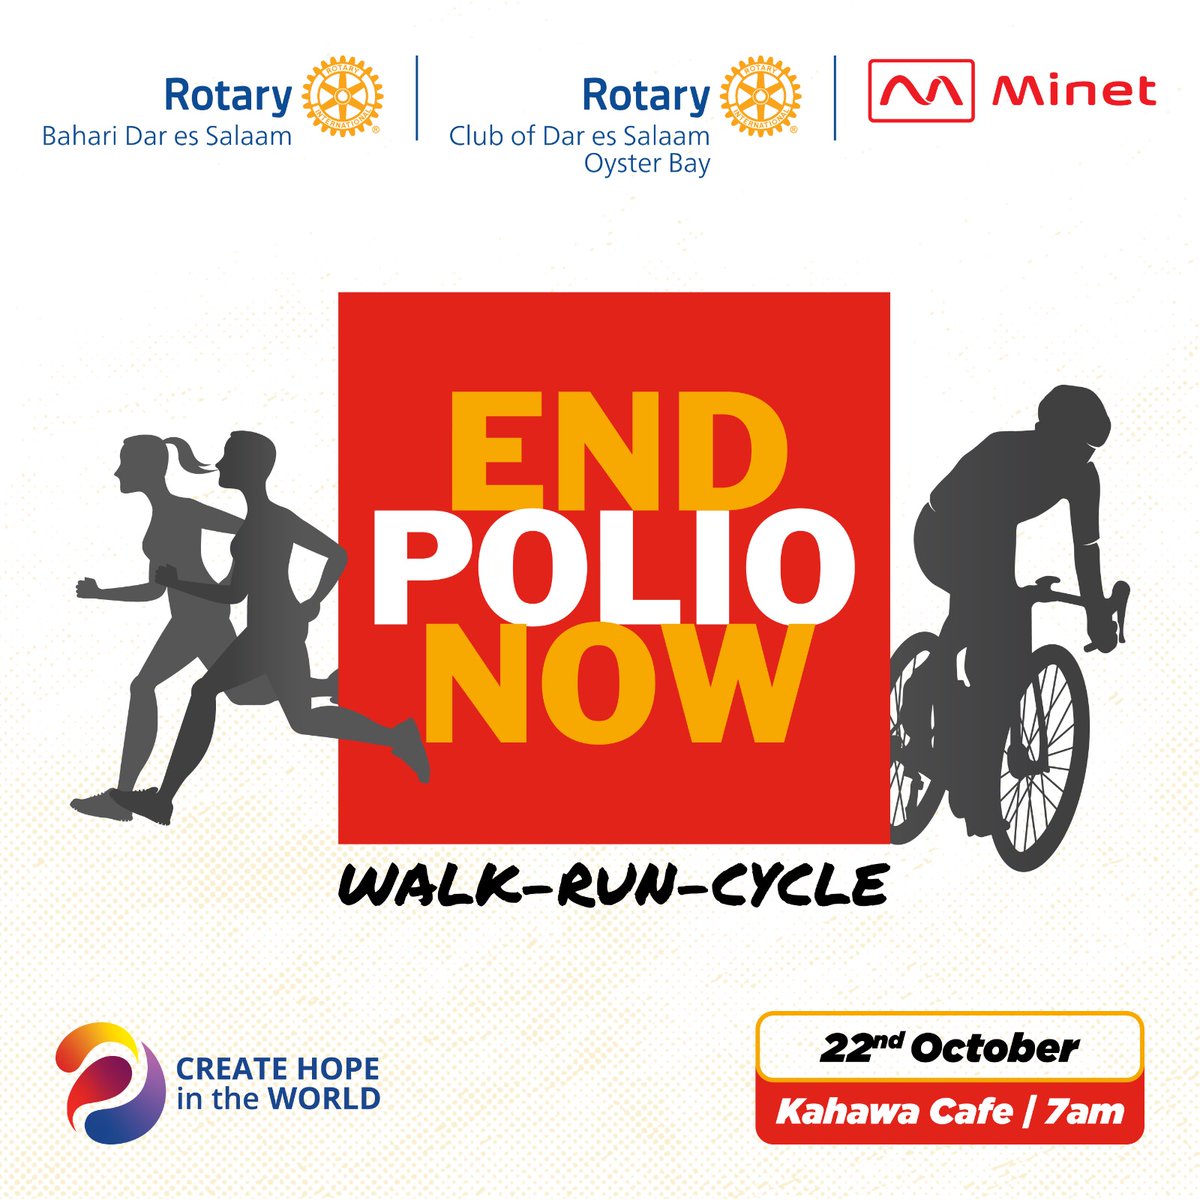 Get ready to move for a cause! 
Join us on October 22nd for the END POLIO walk, run, and cycle event. 

@joysterbay
@rotaryinternational

#rotaryclub #rotarybahari #rotaryoysterbay #PolioFreeFuture #WalkRunCycle #CommunityHealth #EndPolioNow #StepUpToEndPolio #CommunityImpact